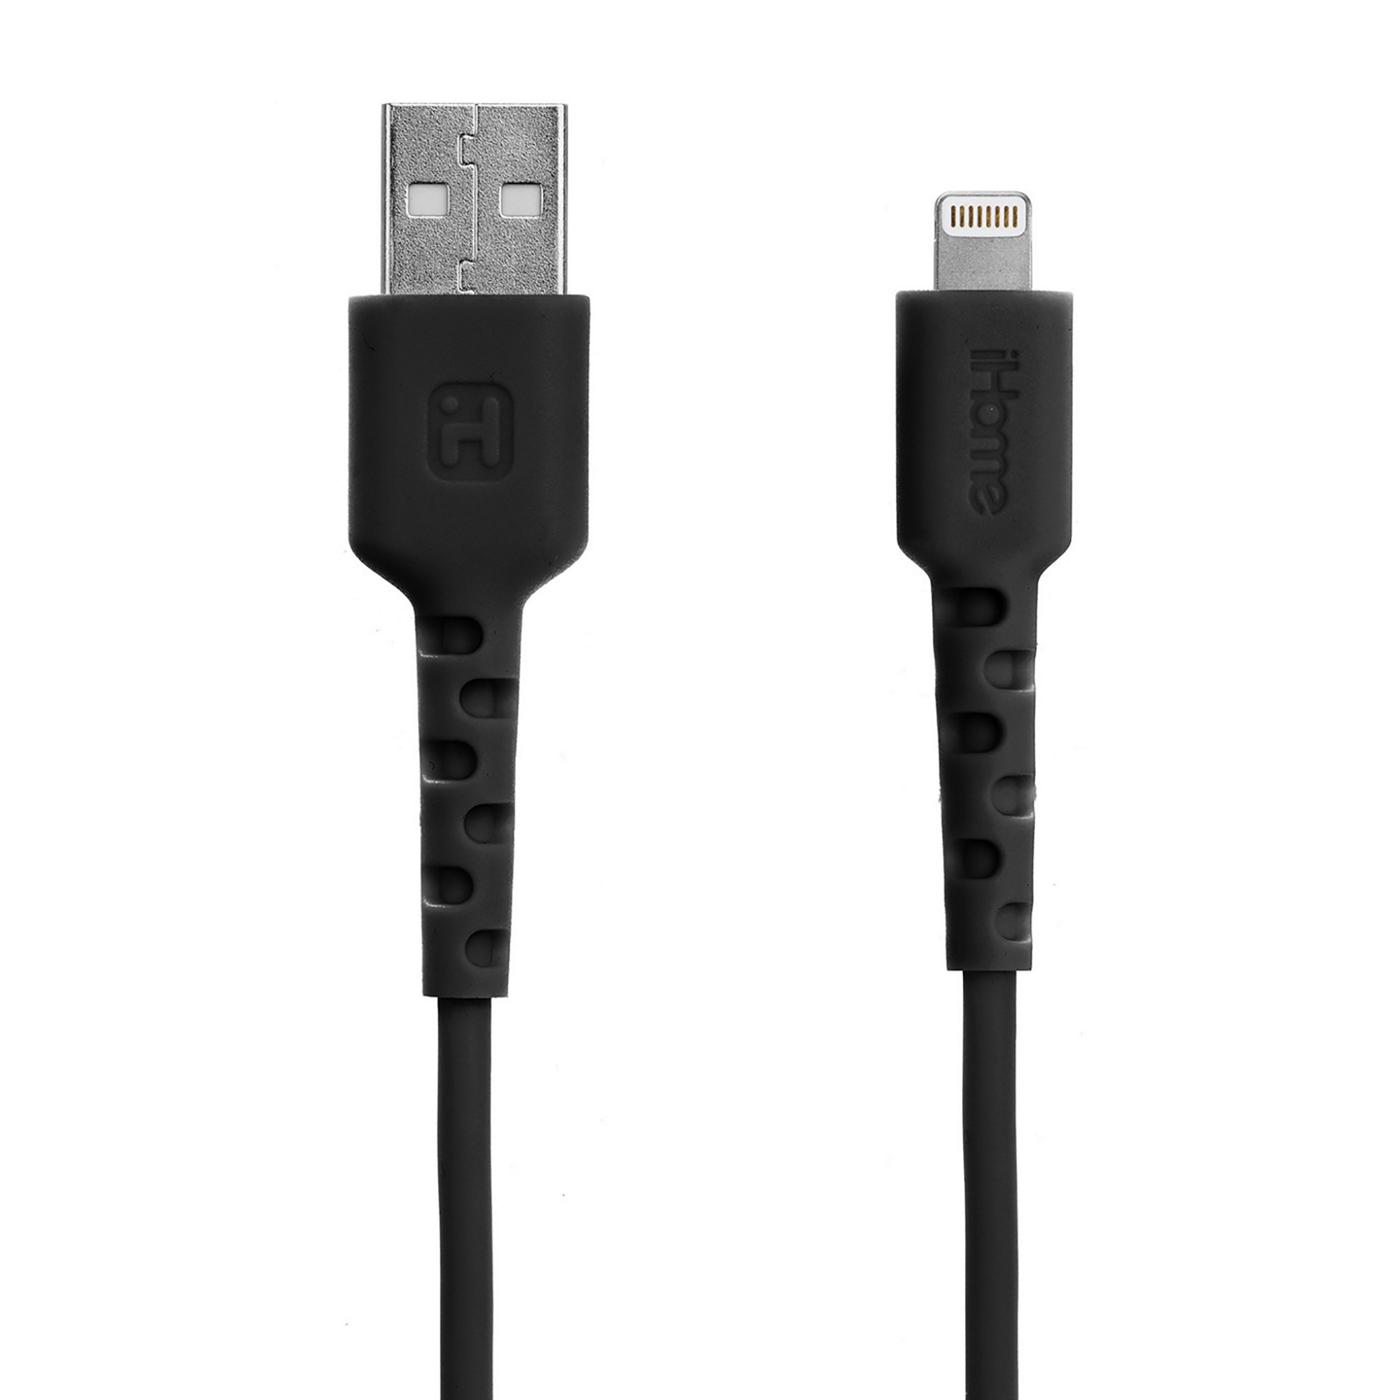 iHome Lightning to USB-A Cable with Wall Charger - Black; image 2 of 3